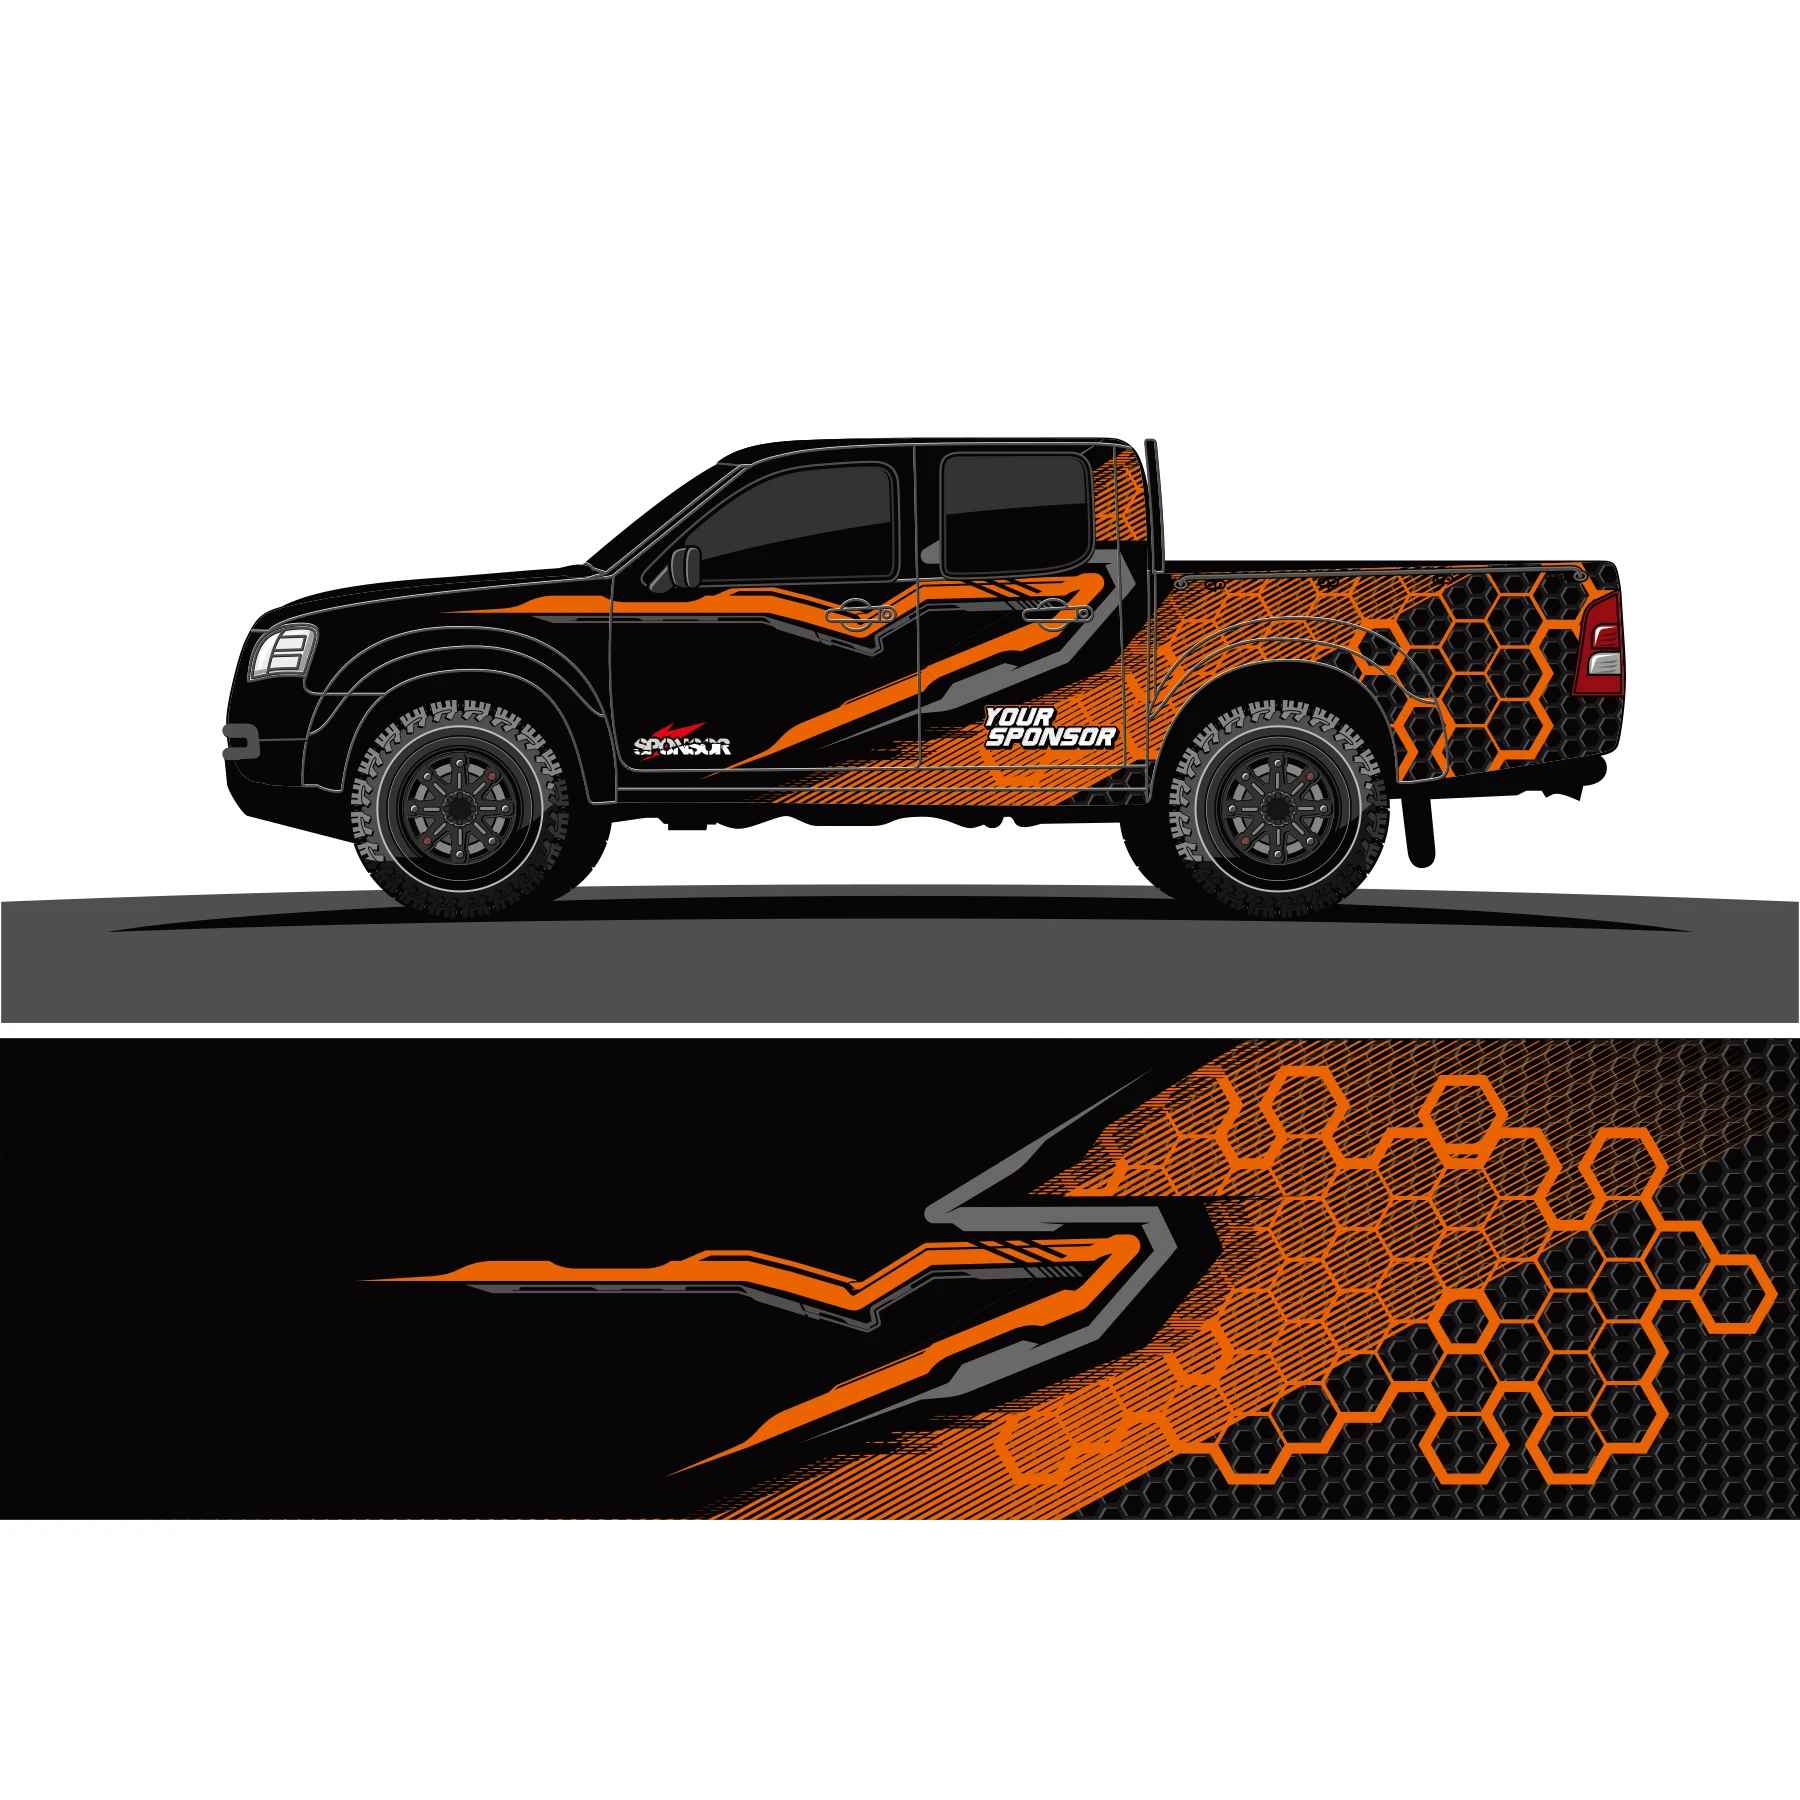 Fishing Truck Car Stickers Fish Graphics Car Stickers Large Car Side Decals  for Truck Pickup SUV Racing Stripes